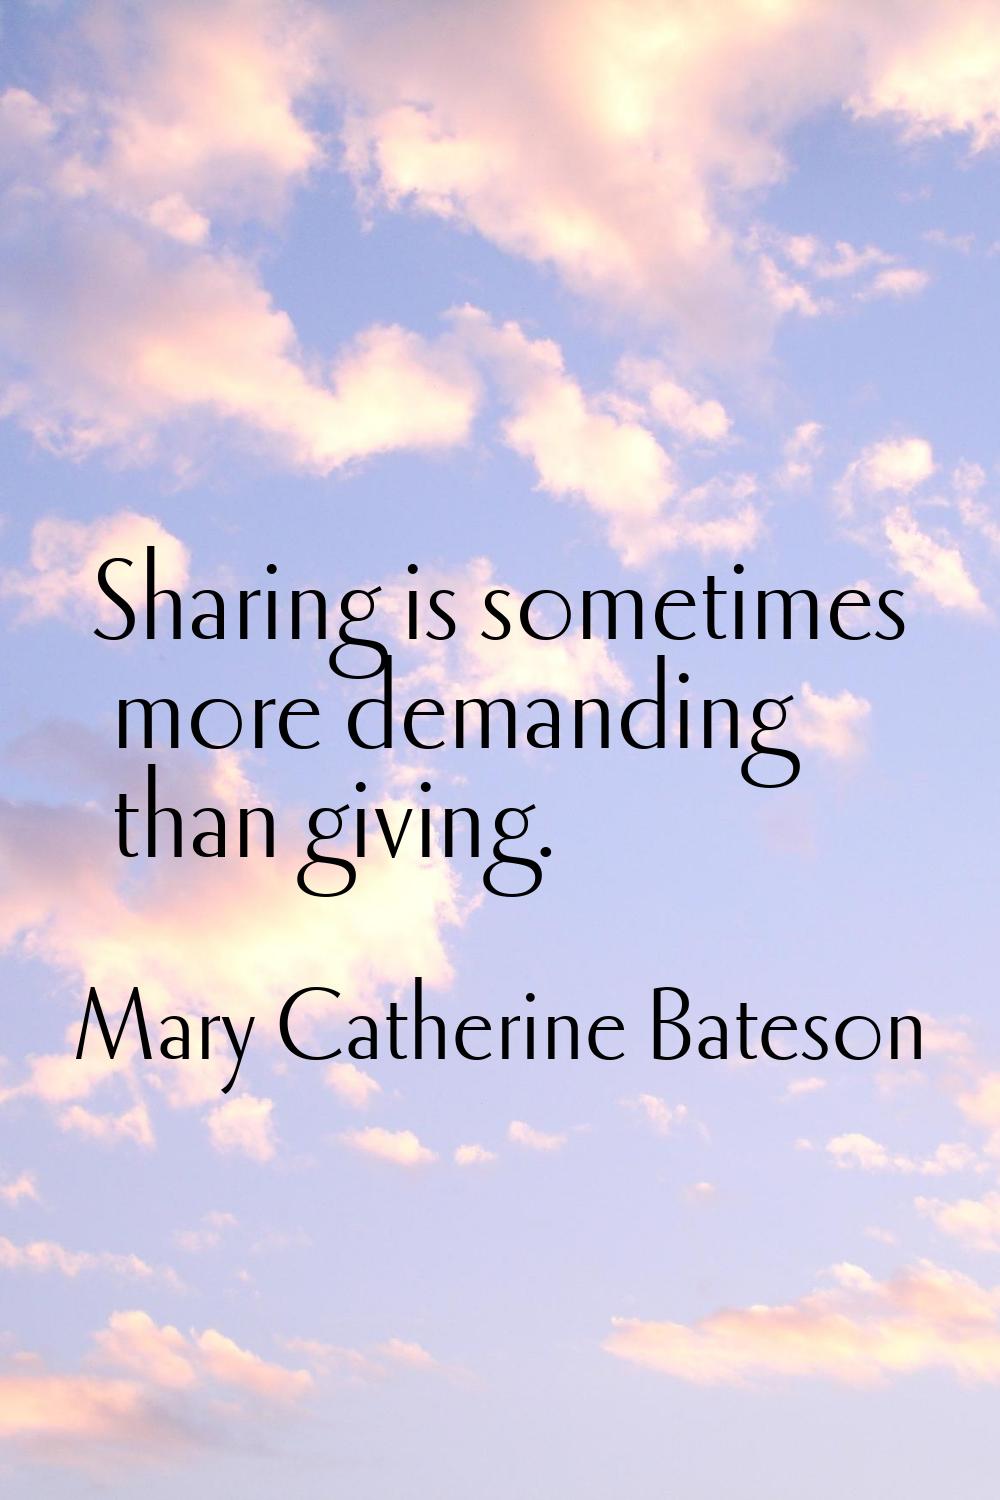 Sharing is sometimes more demanding than giving.